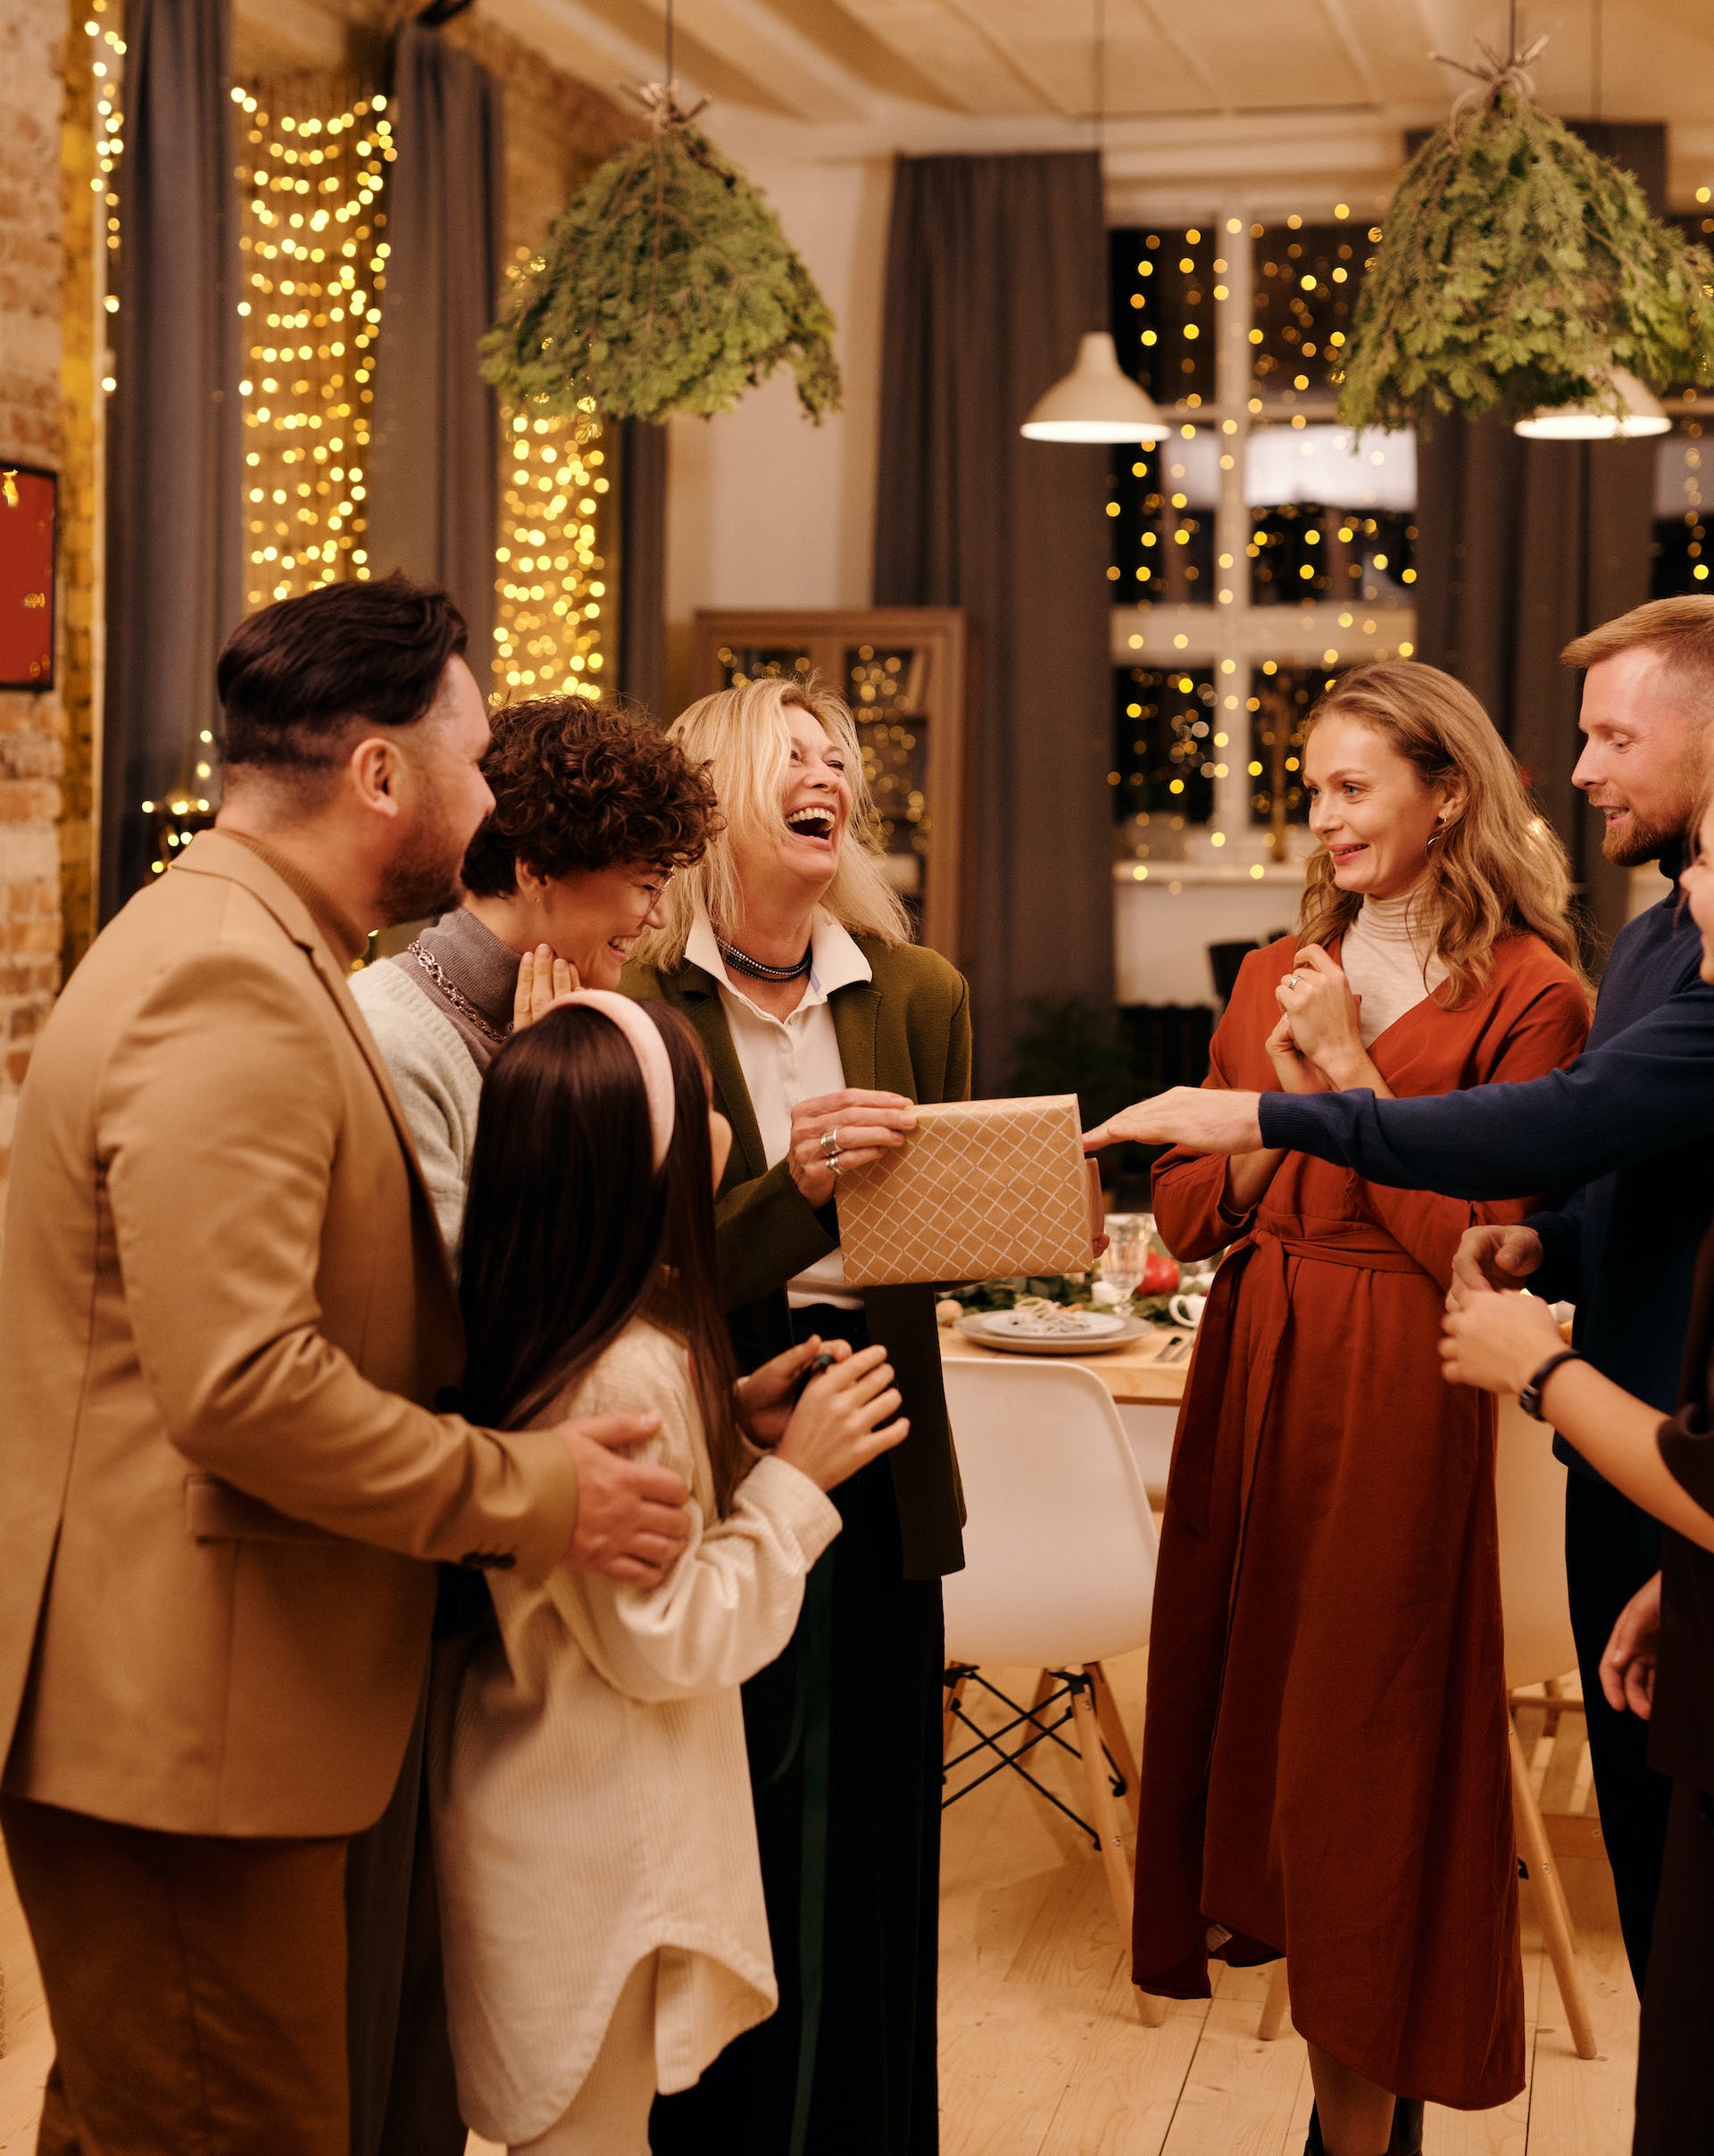 A group of people enjoying a Christmas celebration | Source: Pexels